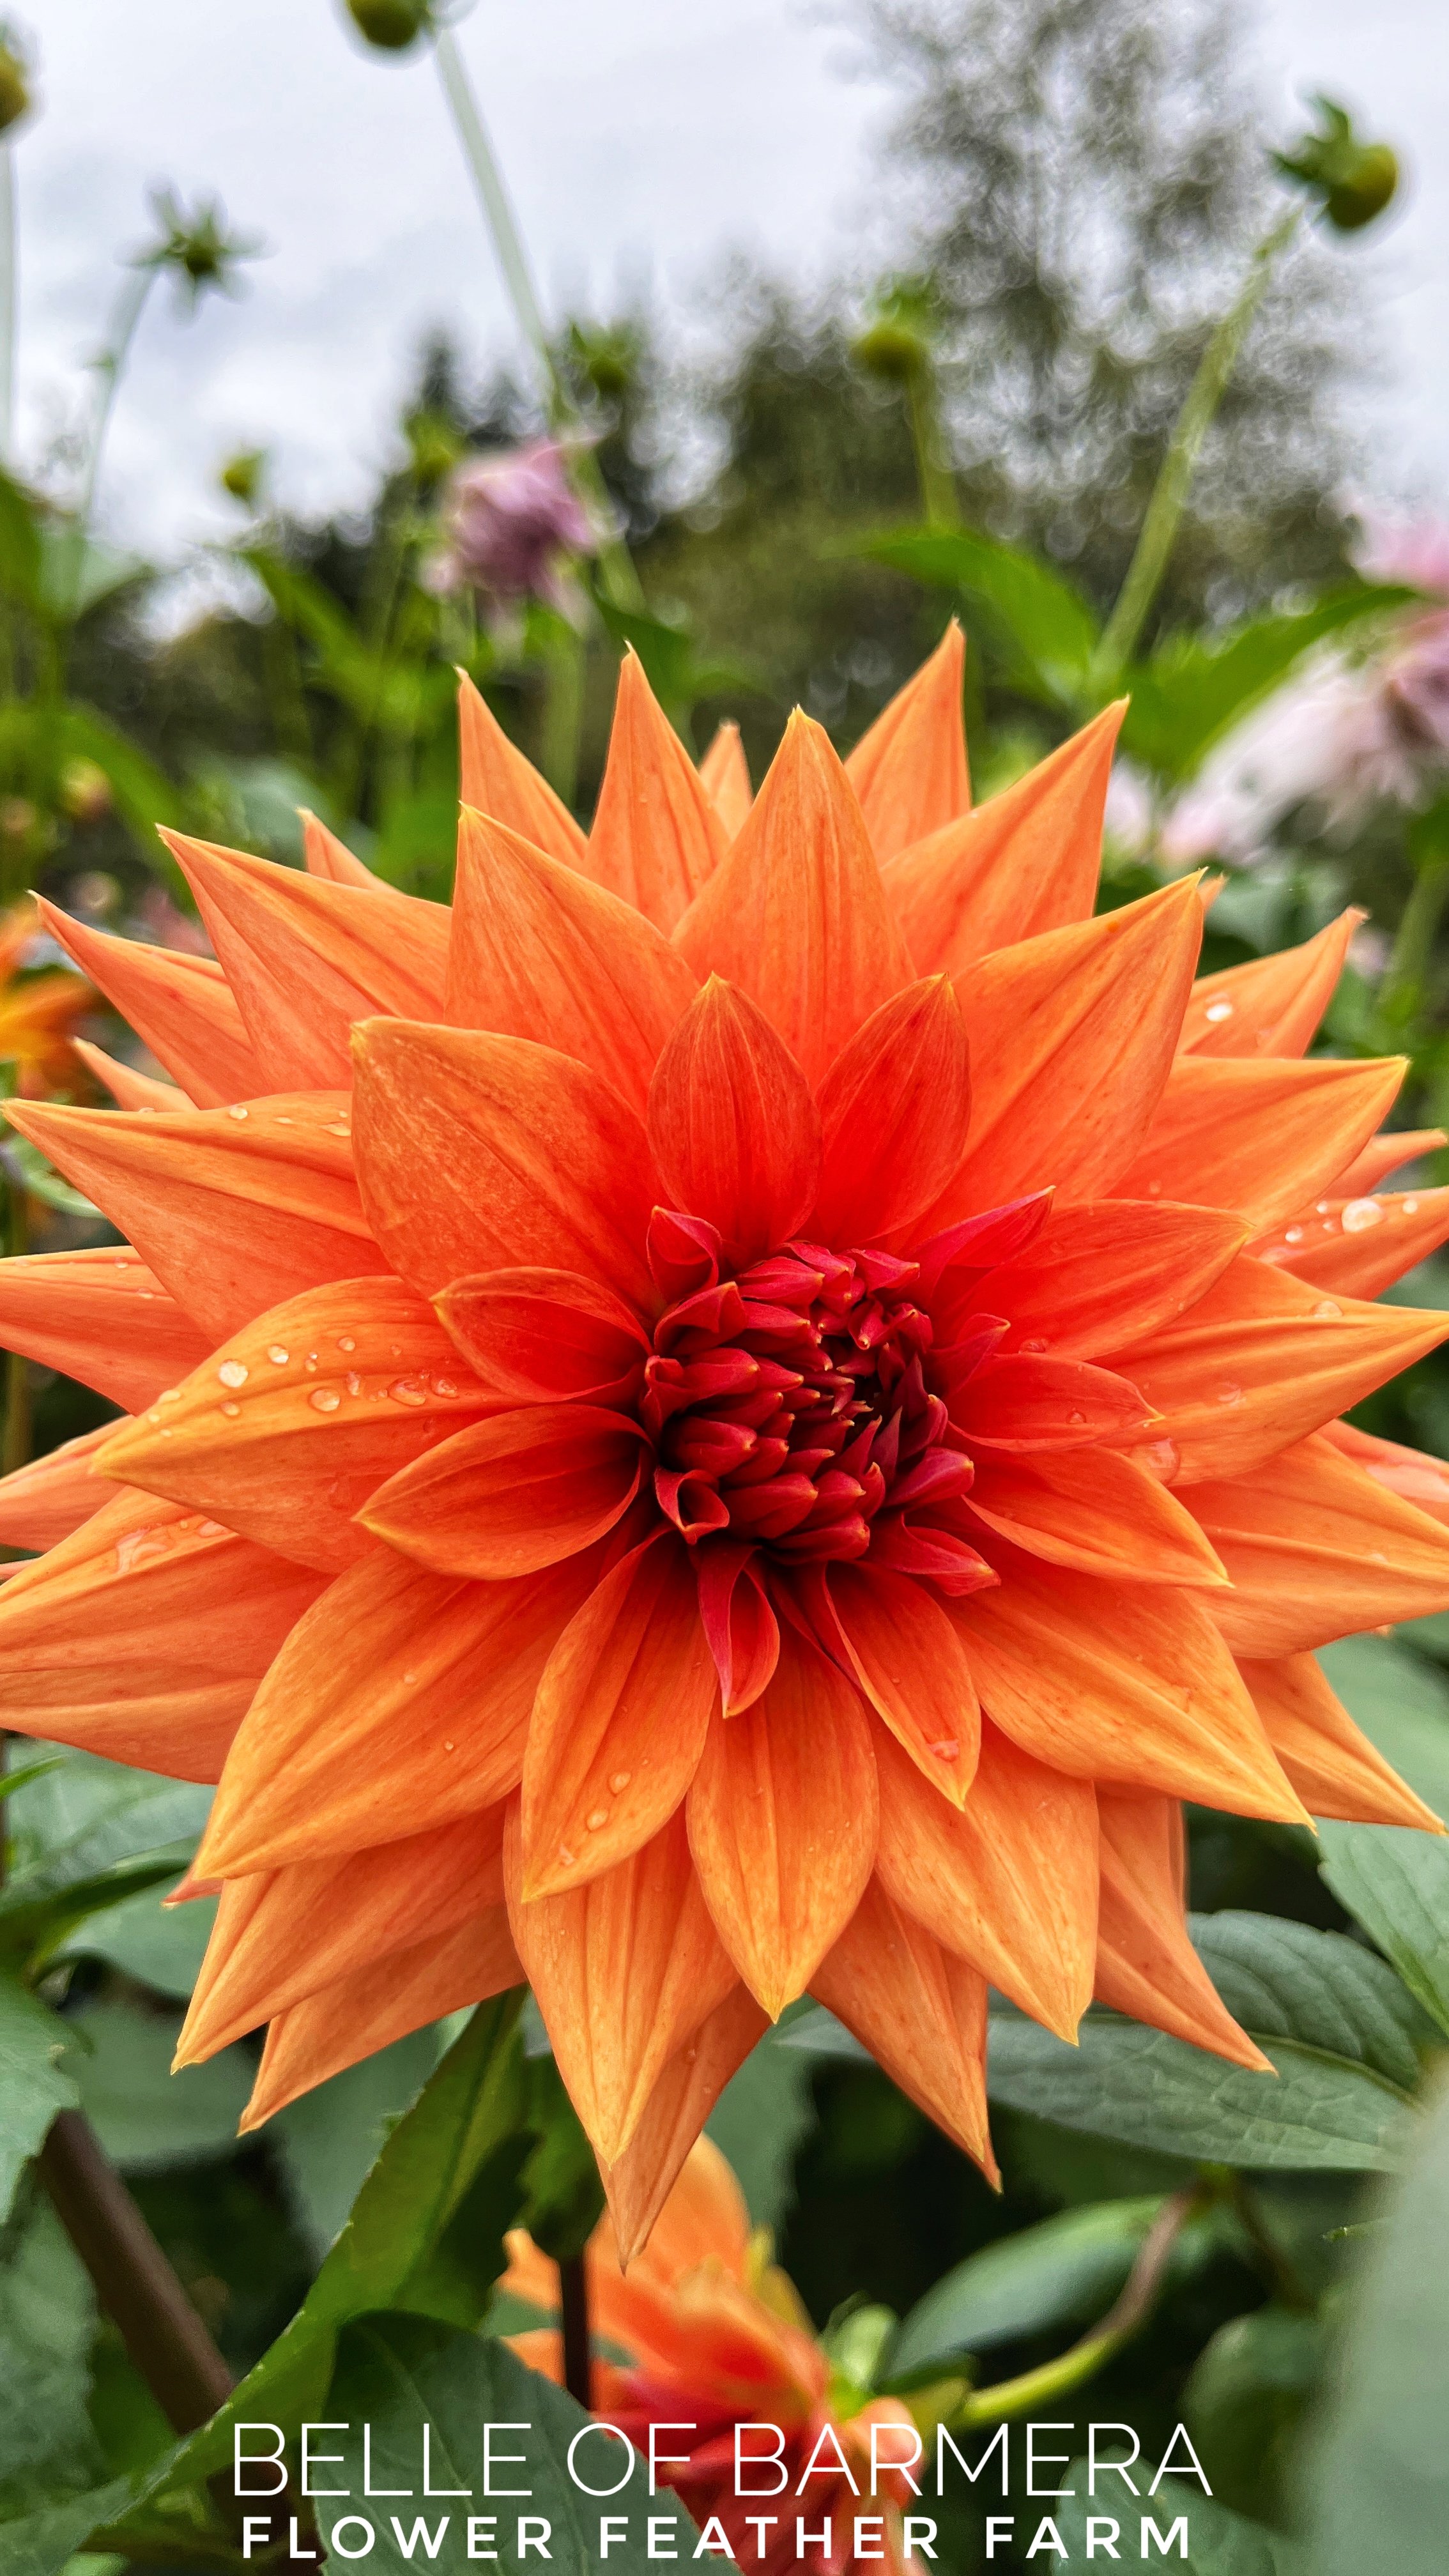 Belle of Barmera Dahlias at Flower Feather Farm, Specialty Chicks and ...